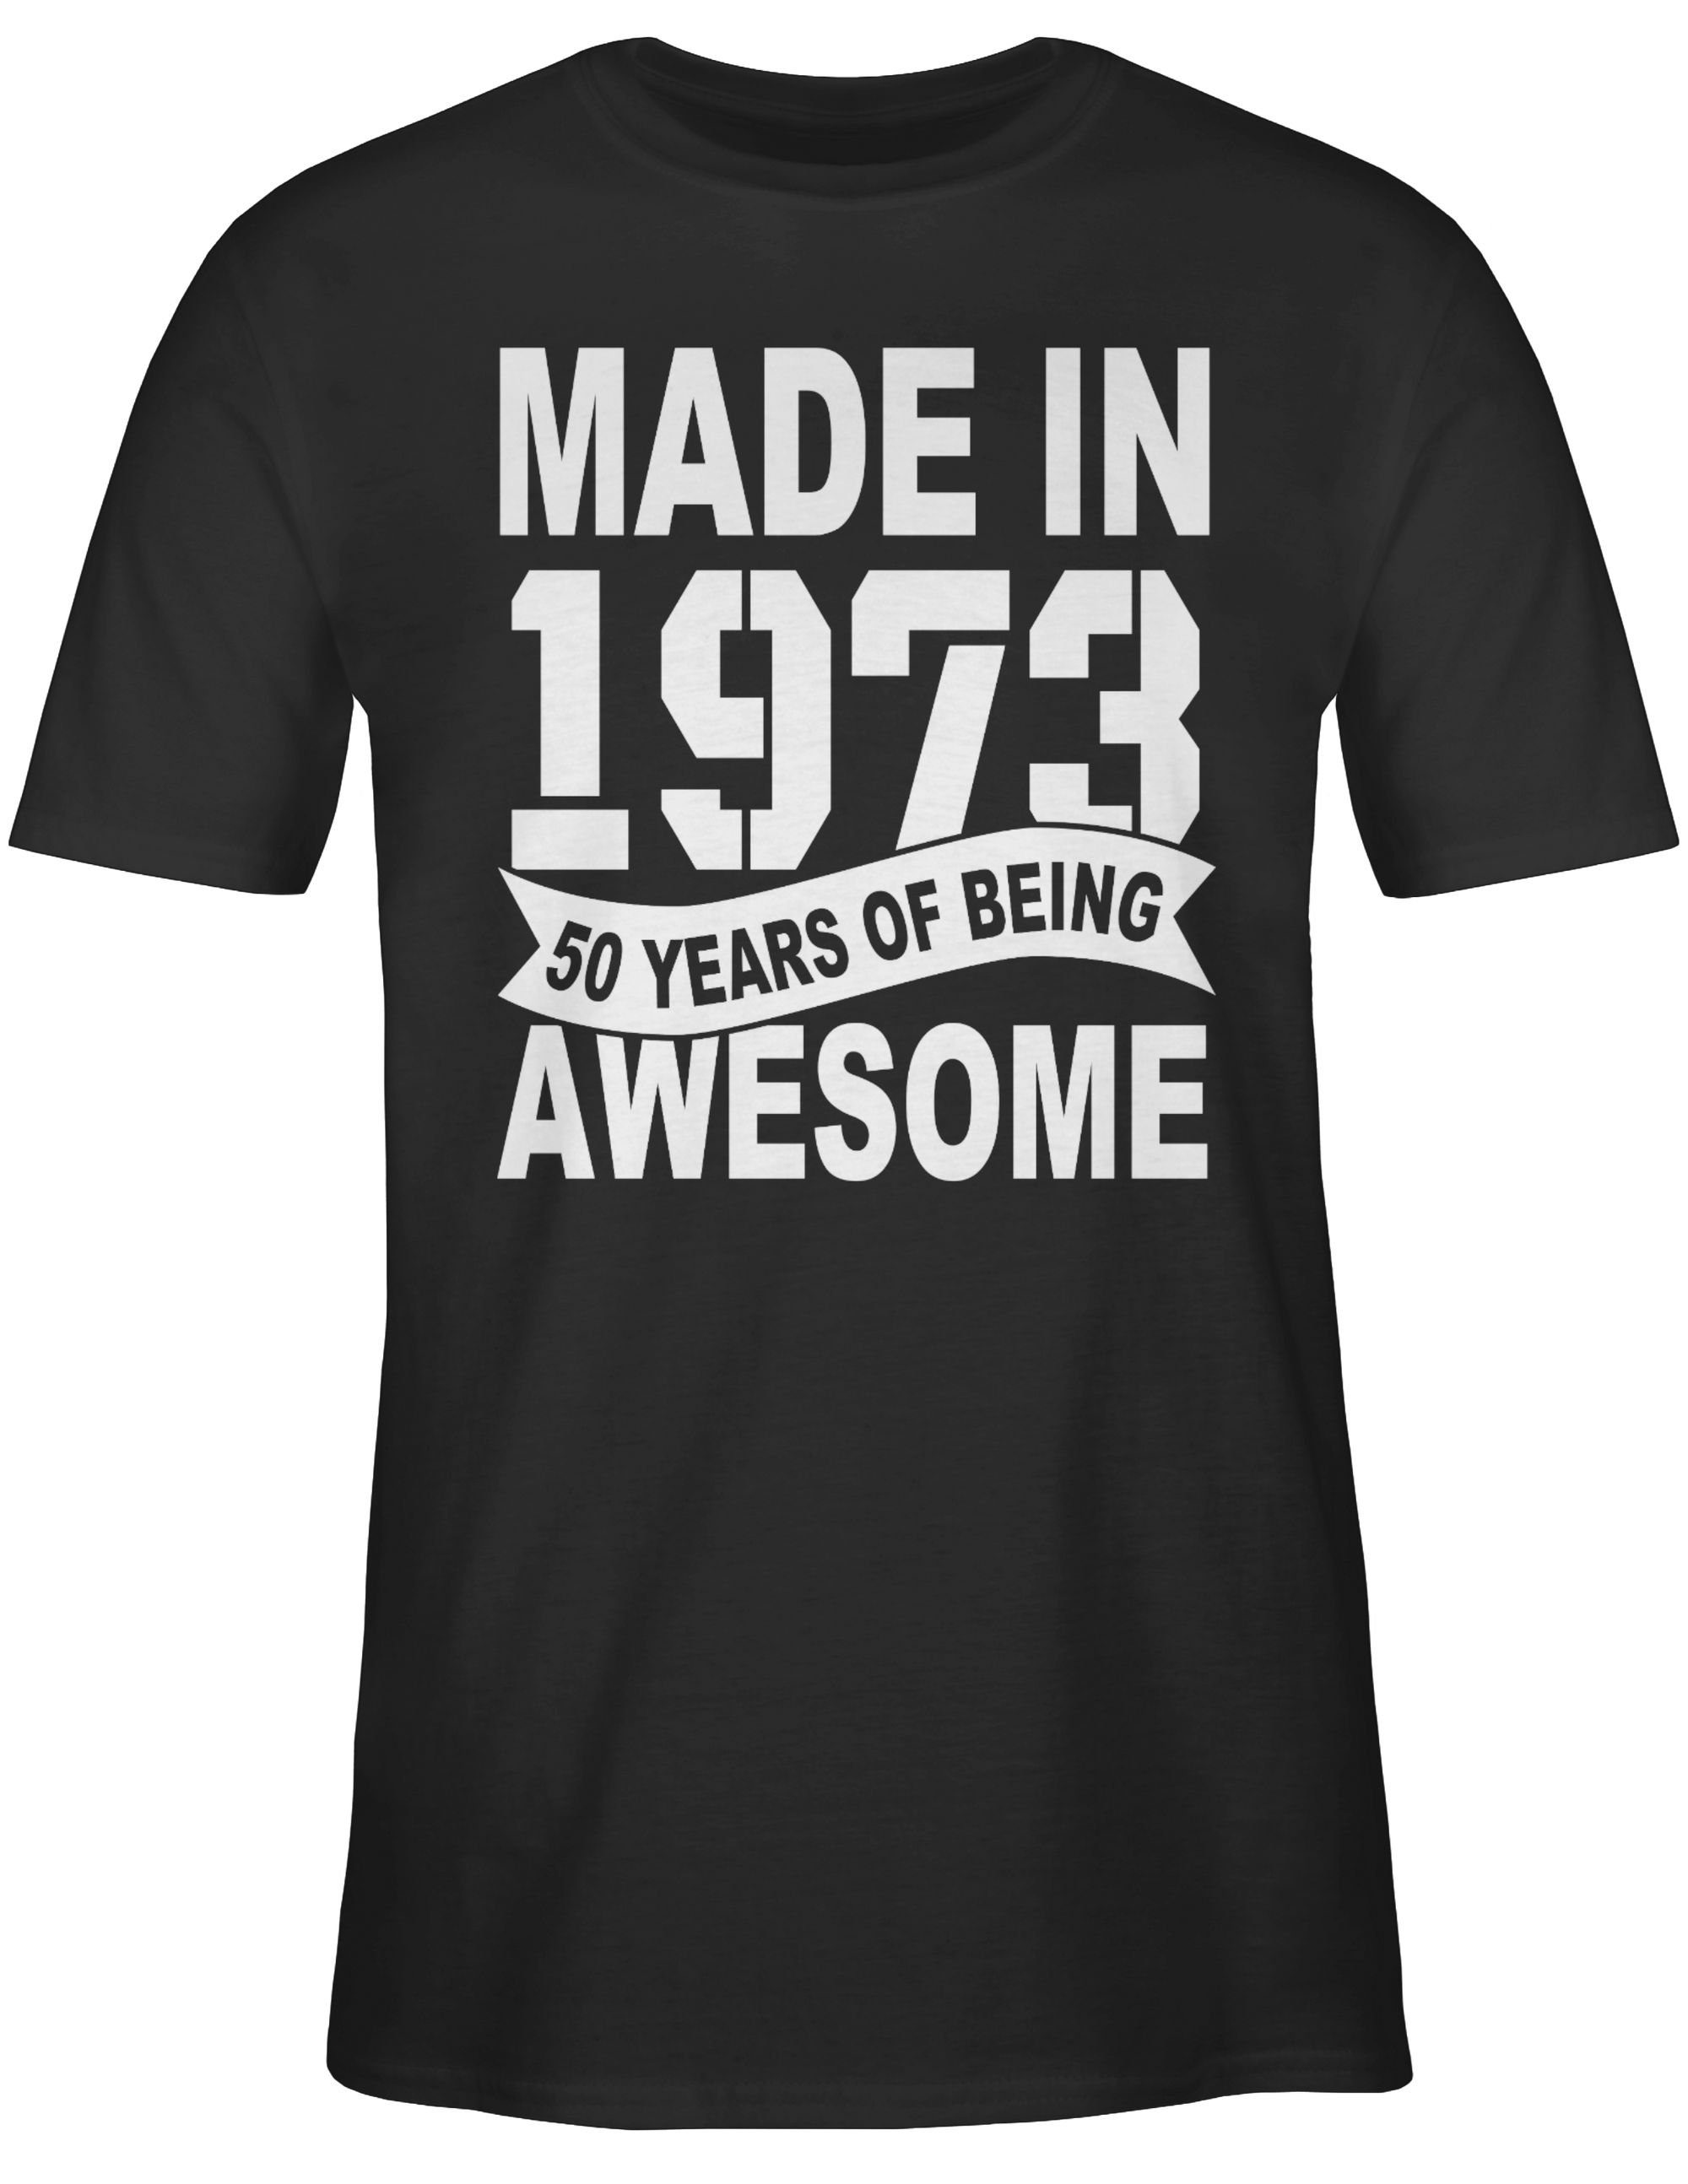 Schwarz of T-Shirt 1973 Fifty awesome being 50. 3 years Geburtstag Shirtracer in Made weiß